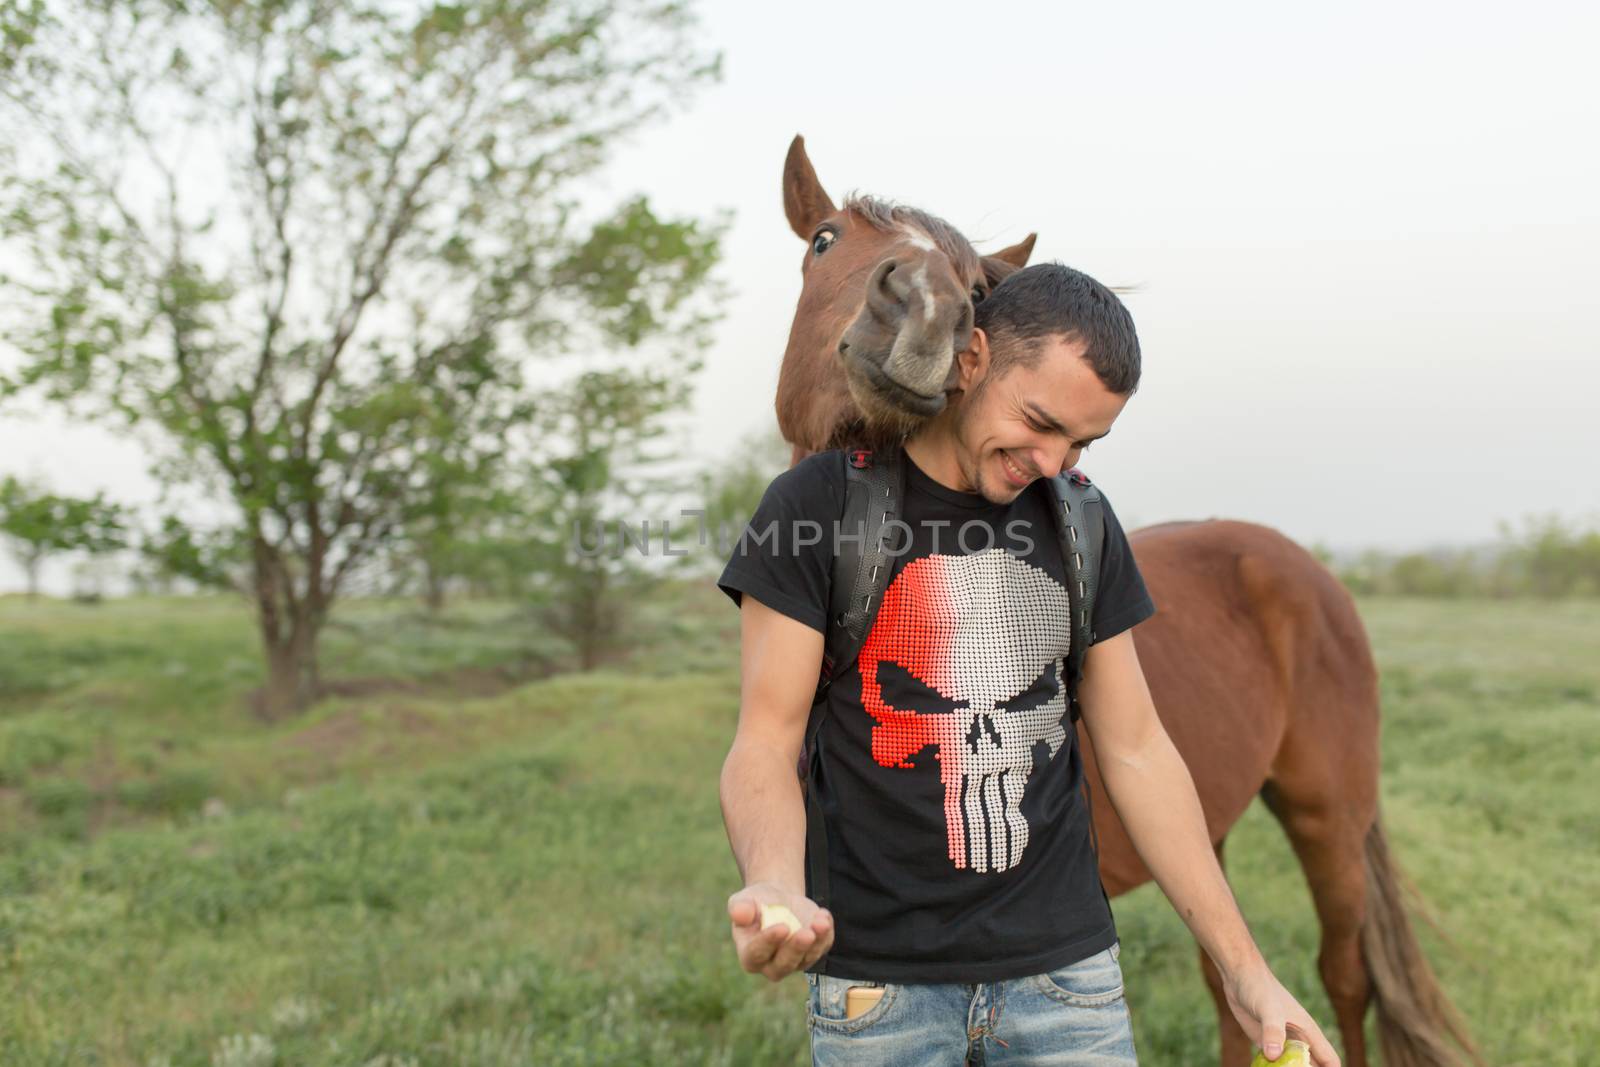 Guy with a horse in a green field. Communication with animals.